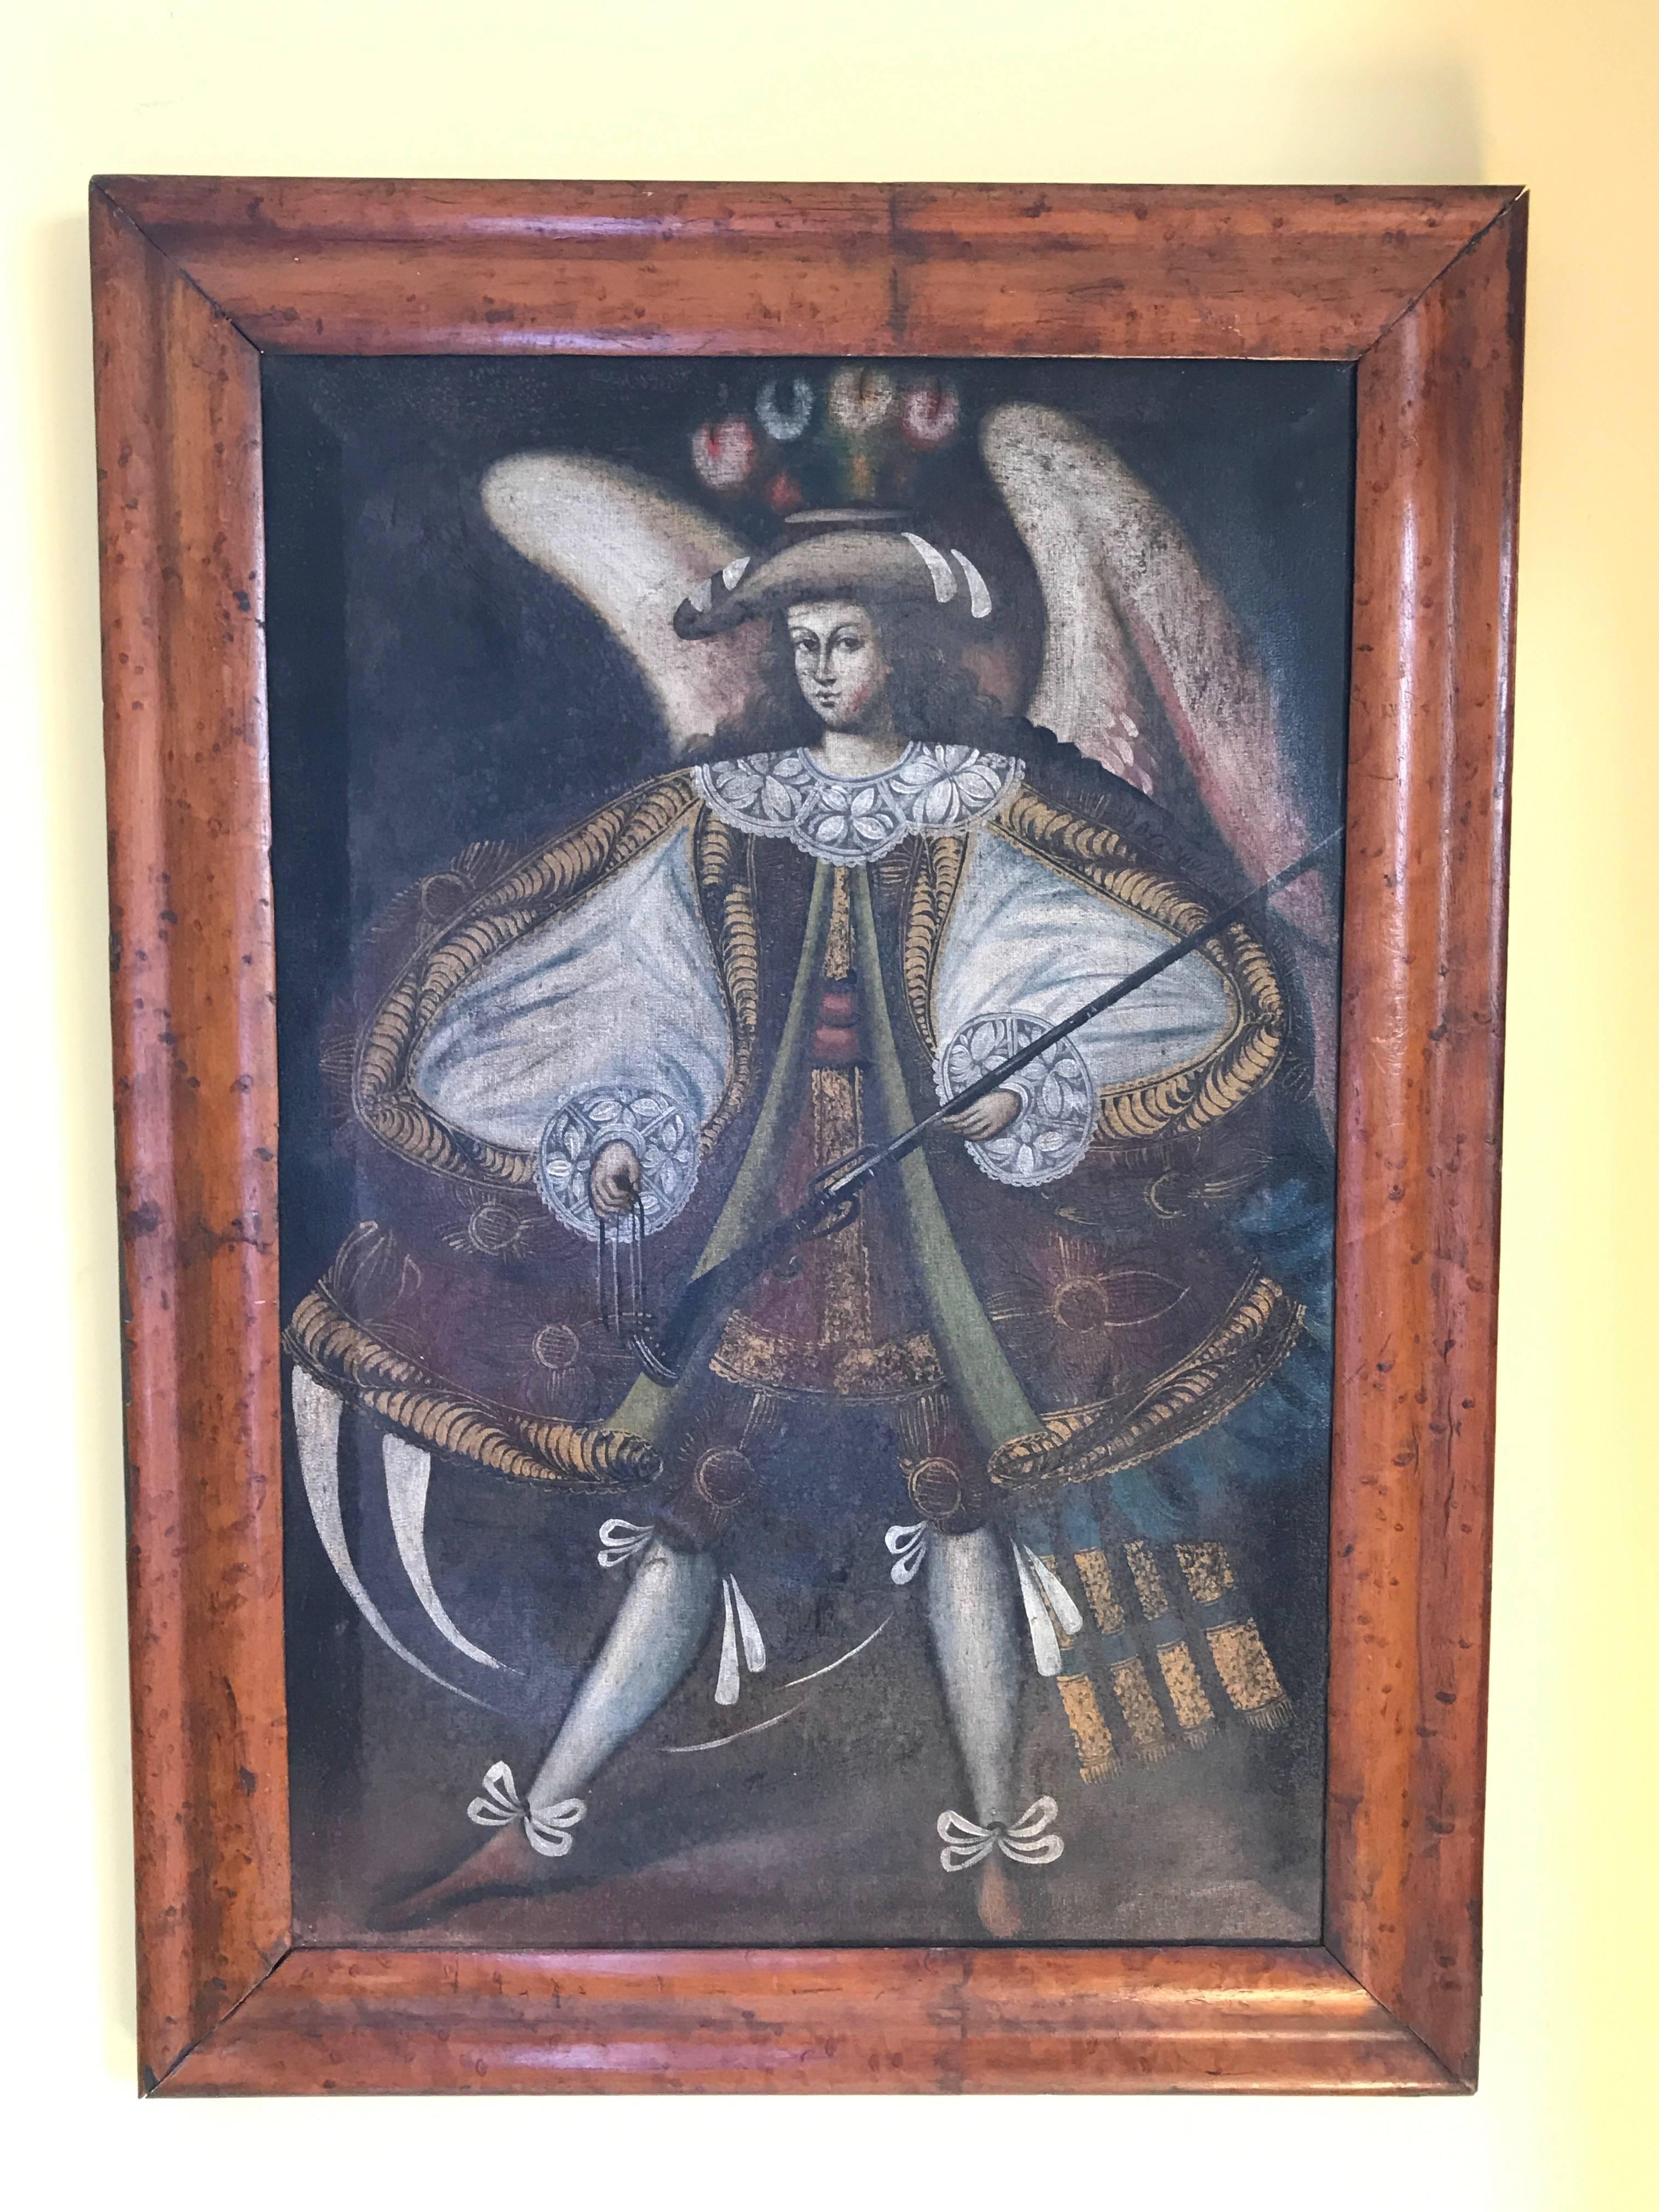 A pair of 19th century oils on canvas in the 16th century manor in the Cusco school depicting two winged arc angels holding muskets and traditional 16th attire in Maple frames.